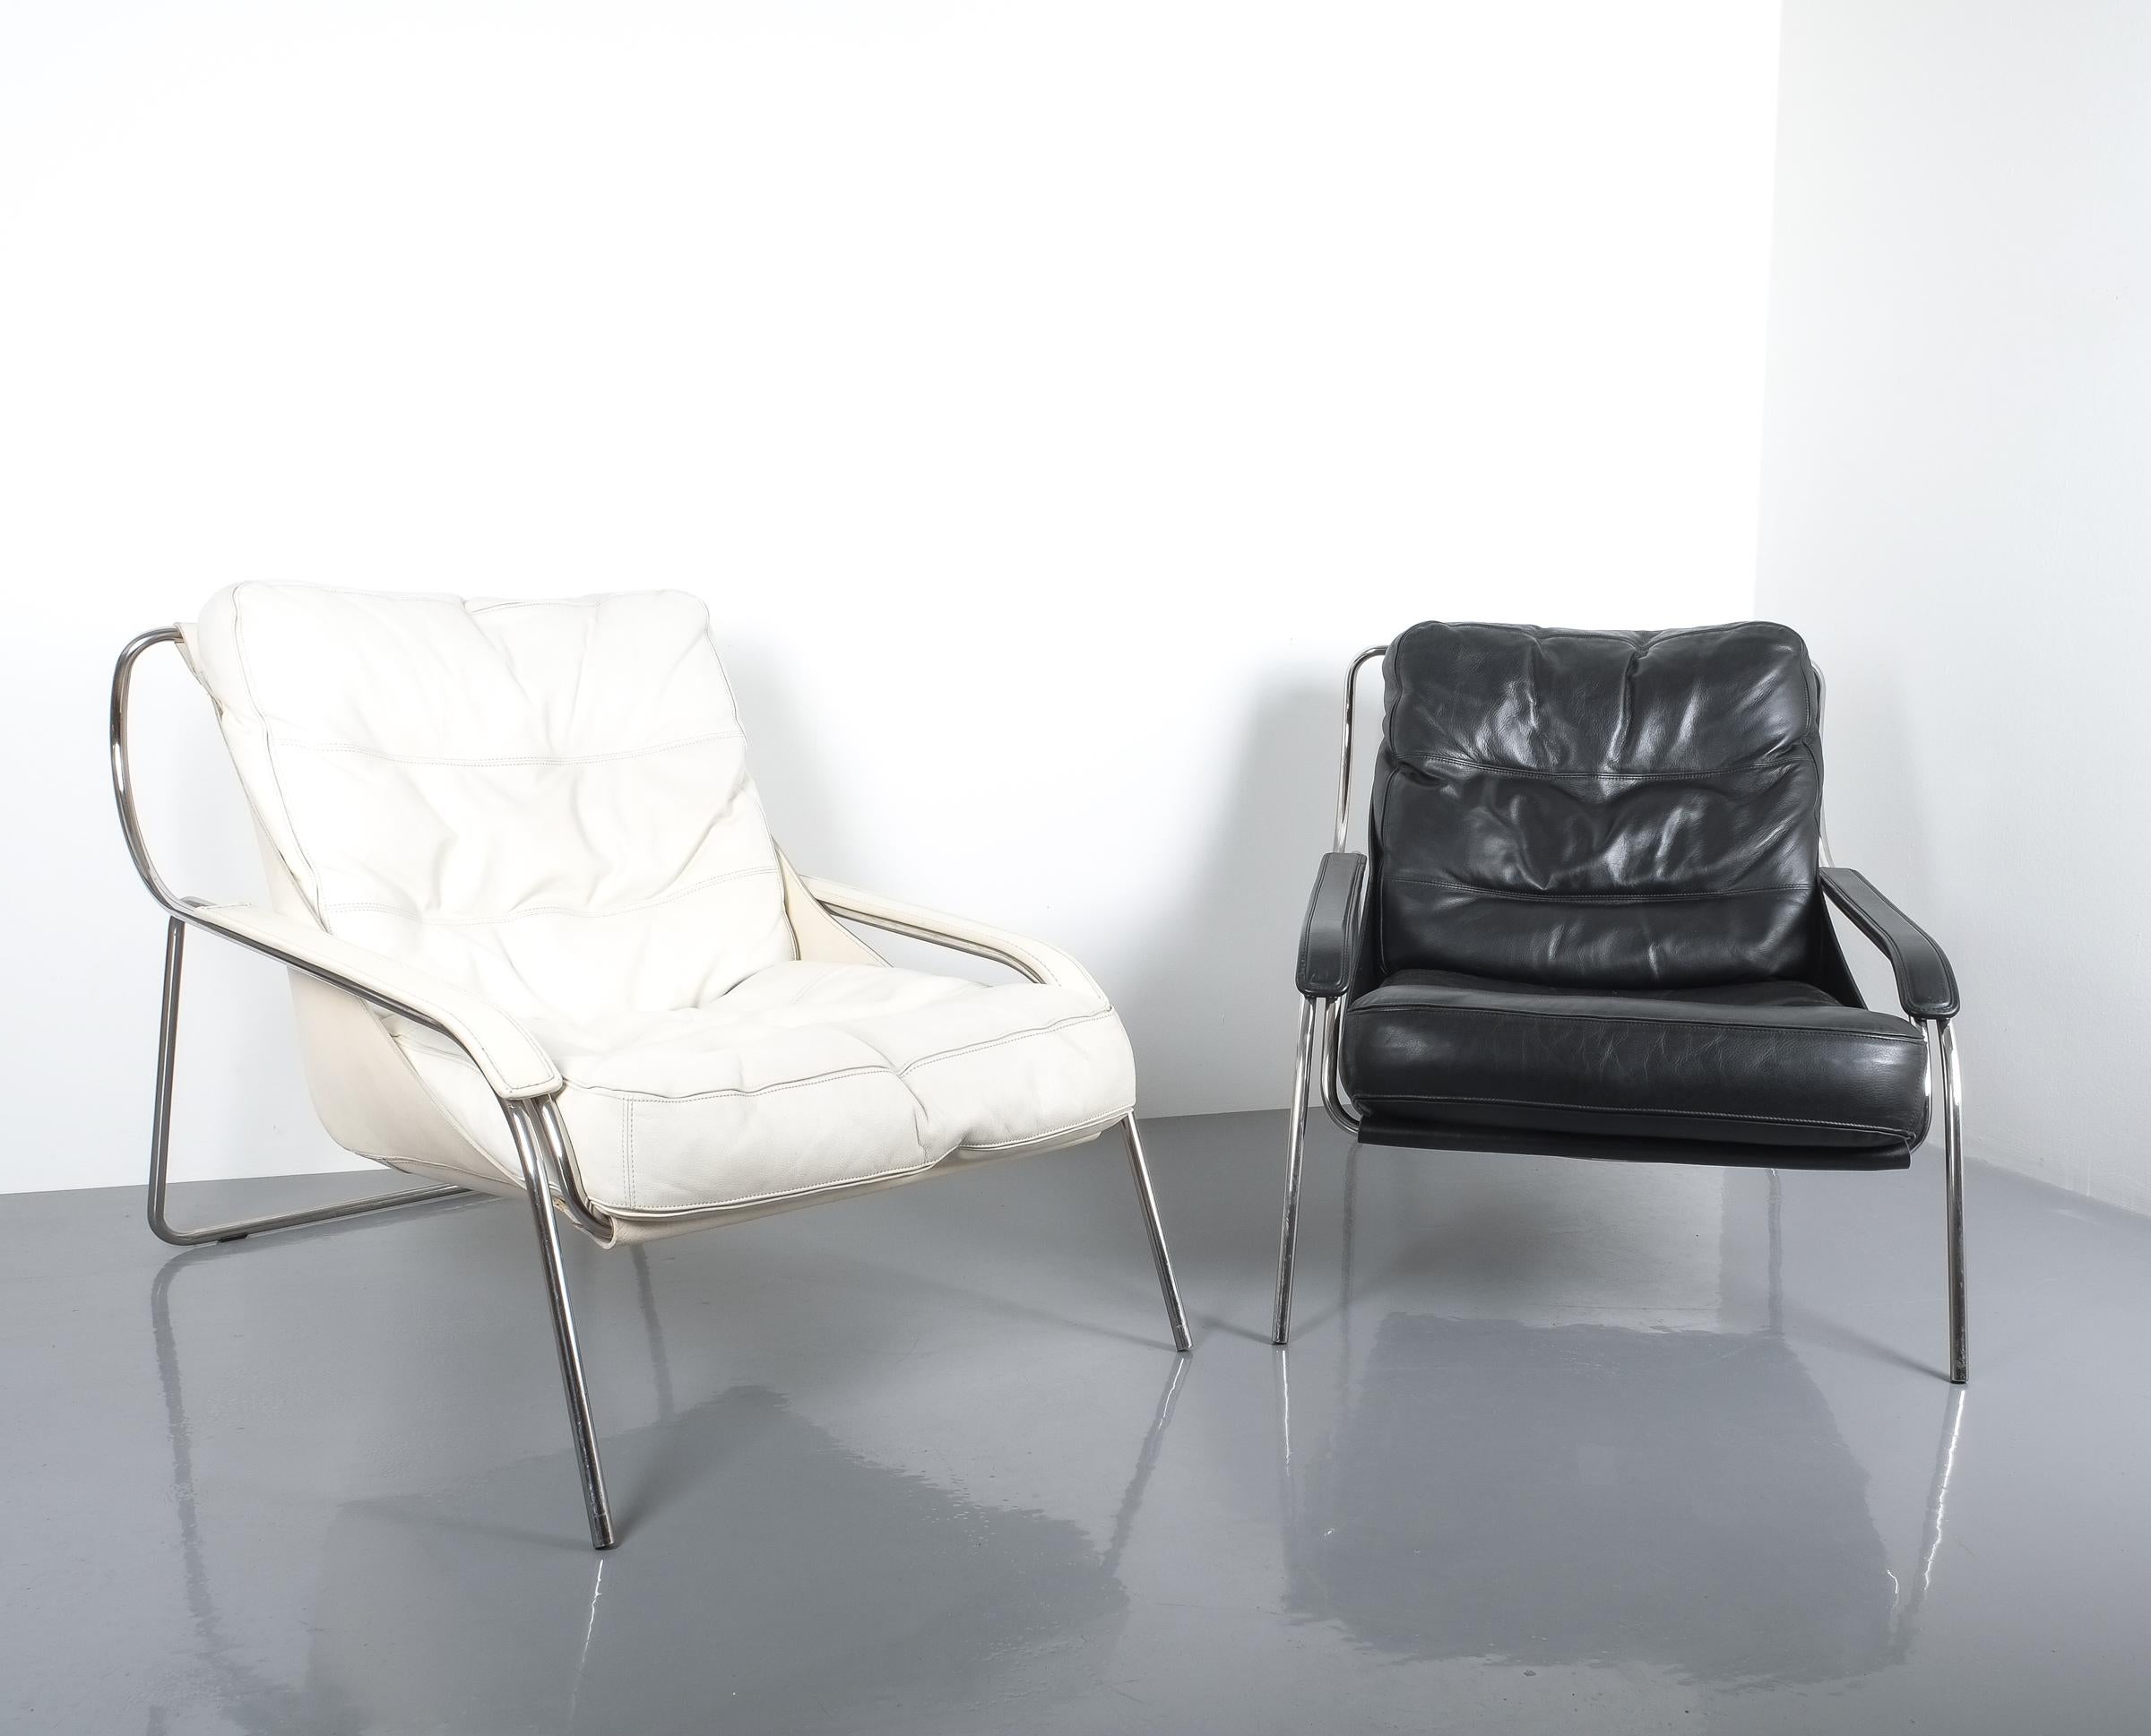 Mid-20th Century Marco Zanuso Maggiolina Sling Black Leather Chair by Zanotta, 1947 For Sale